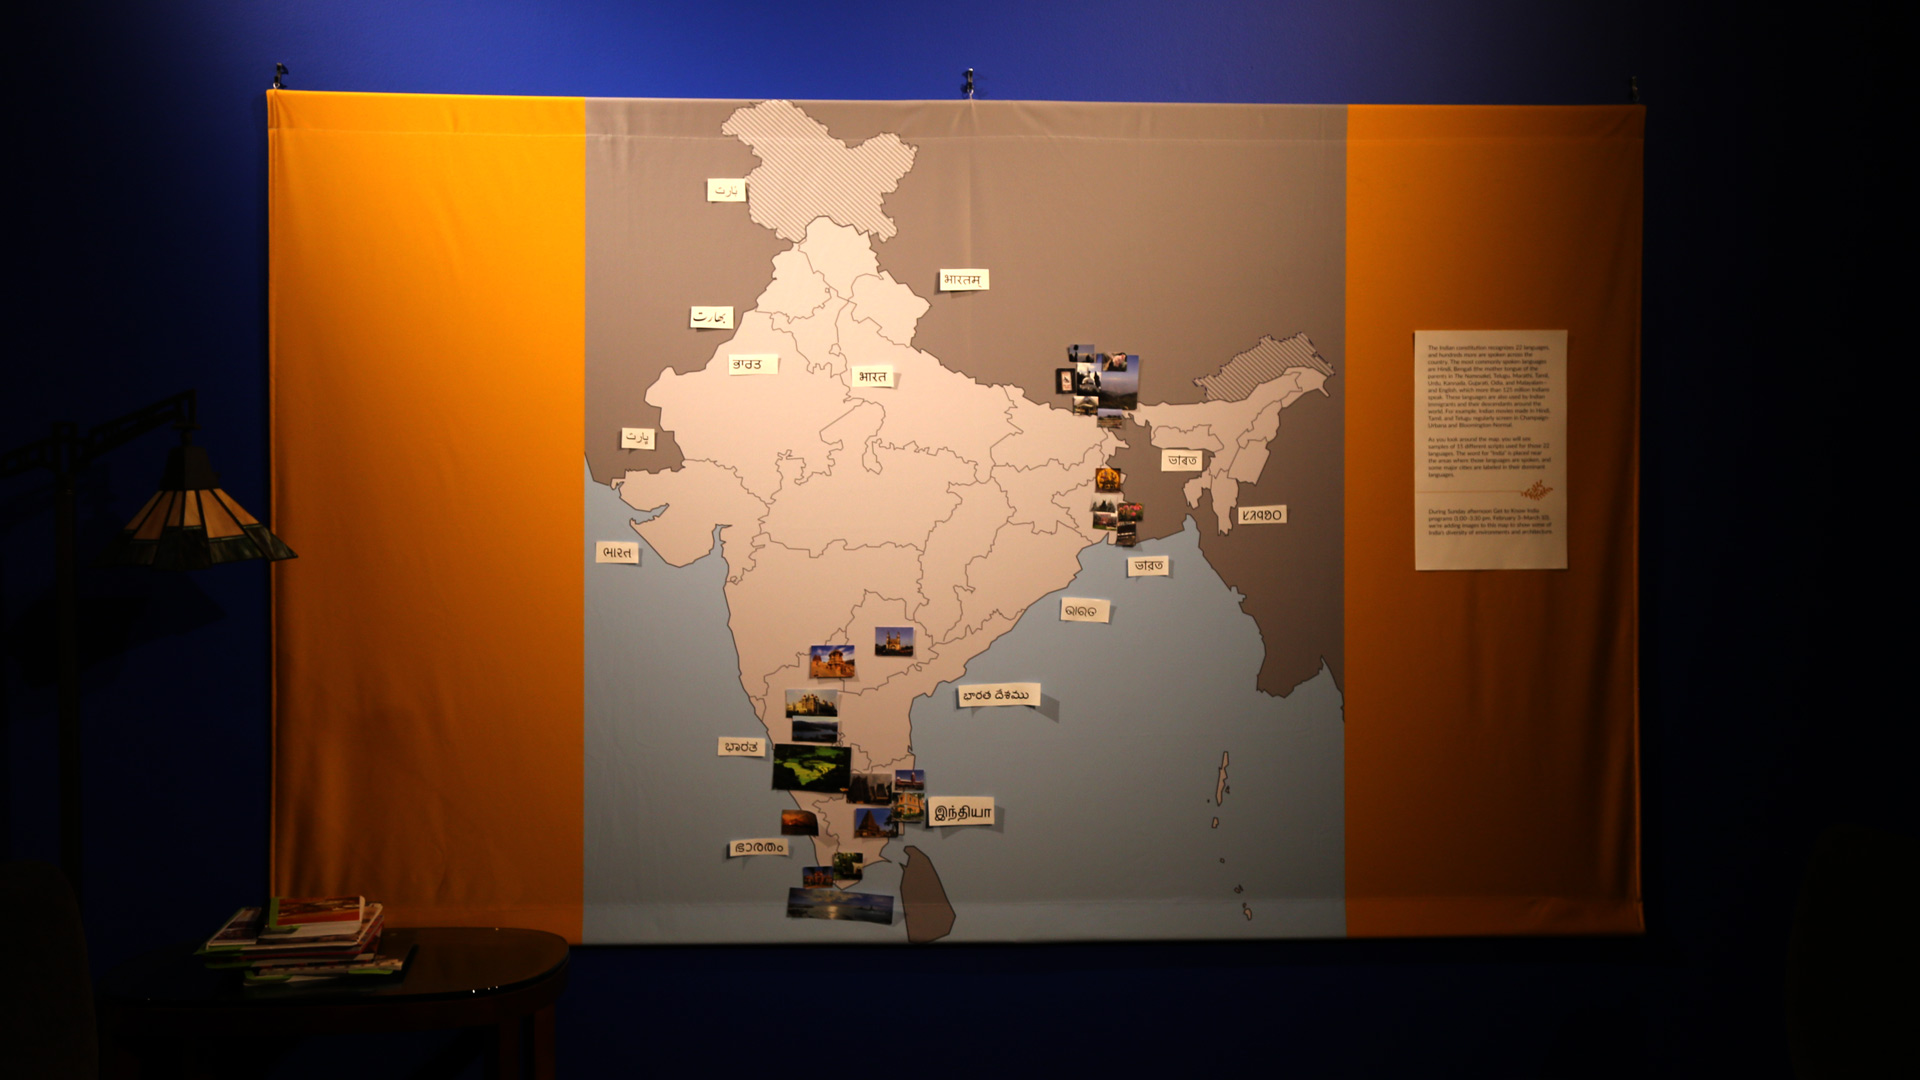 another picture of the map of india with pictures on it